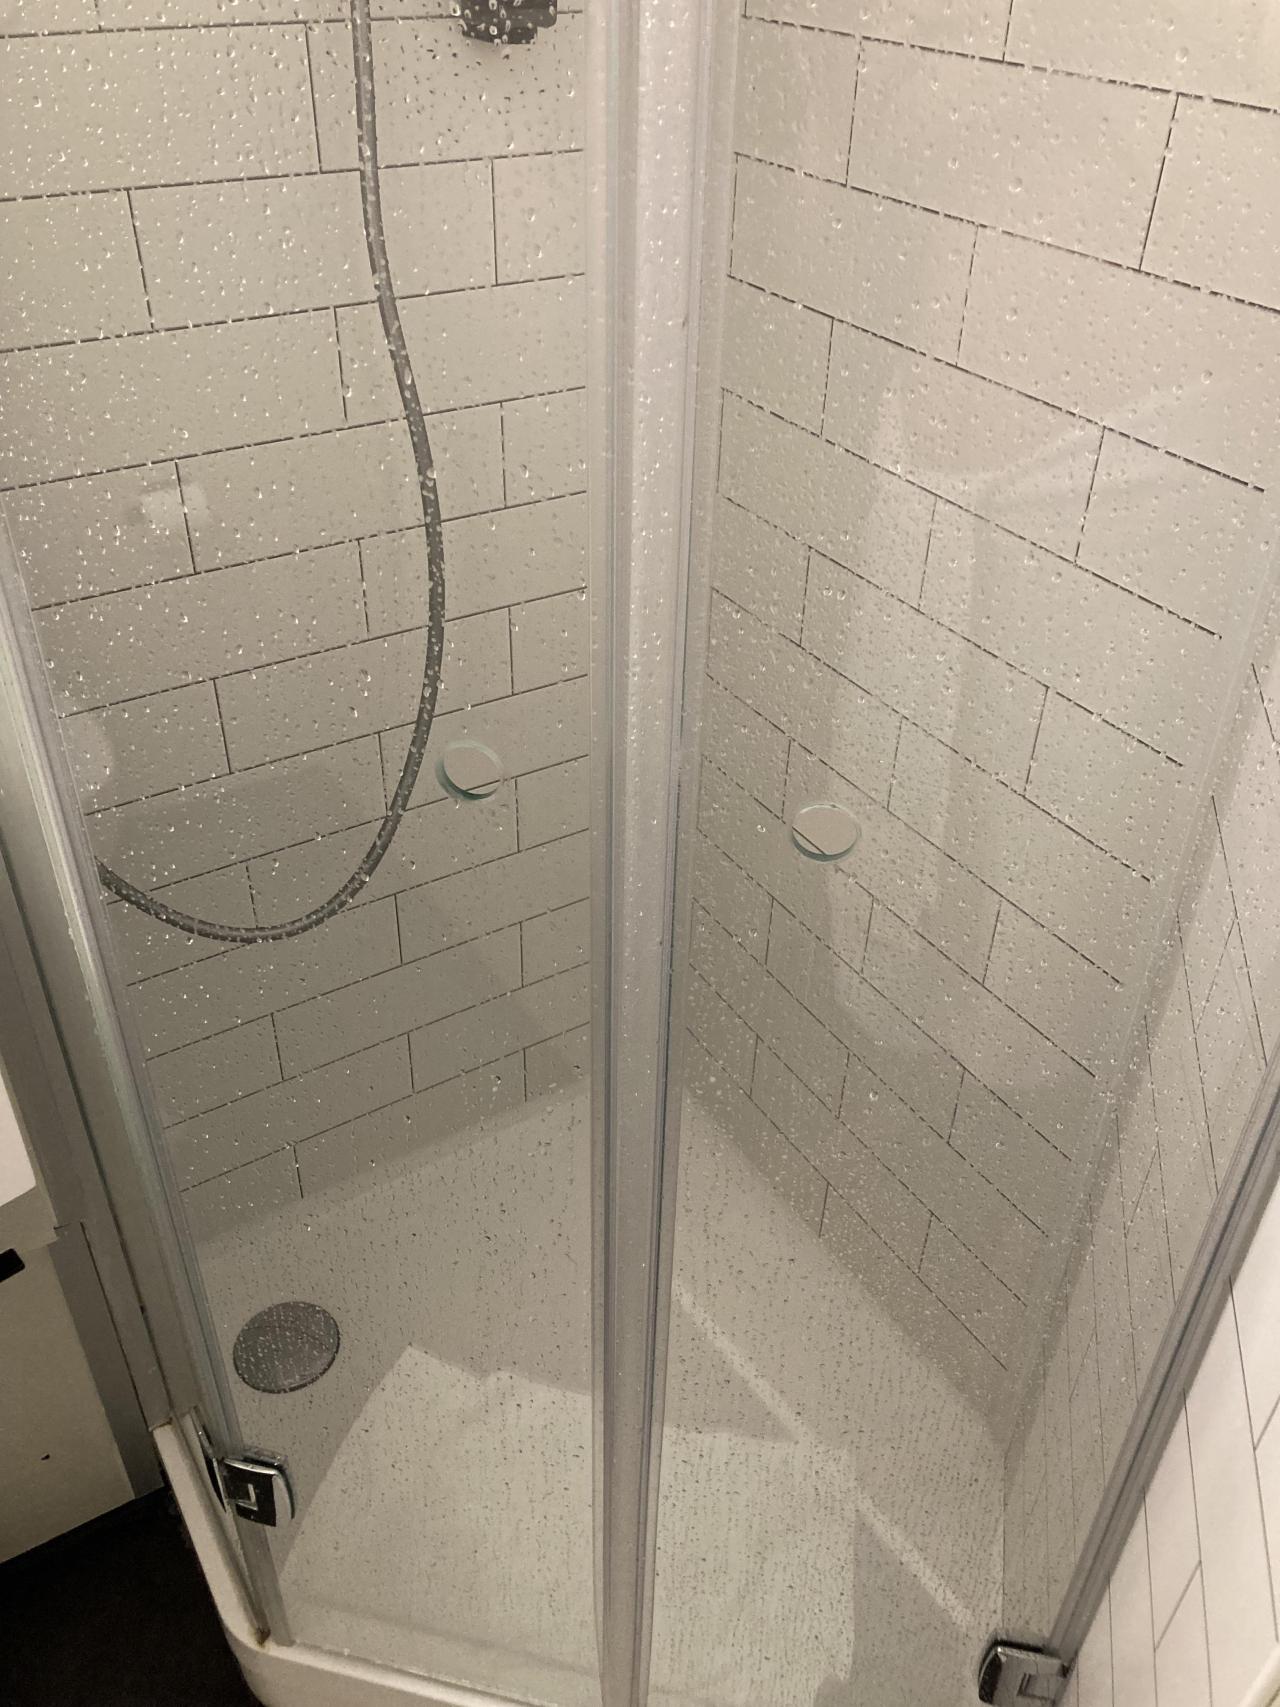 Apparently handles are too much - two holes in the shower door at our hotel in Paris Source: CrappyDesign #design#LOL#funny